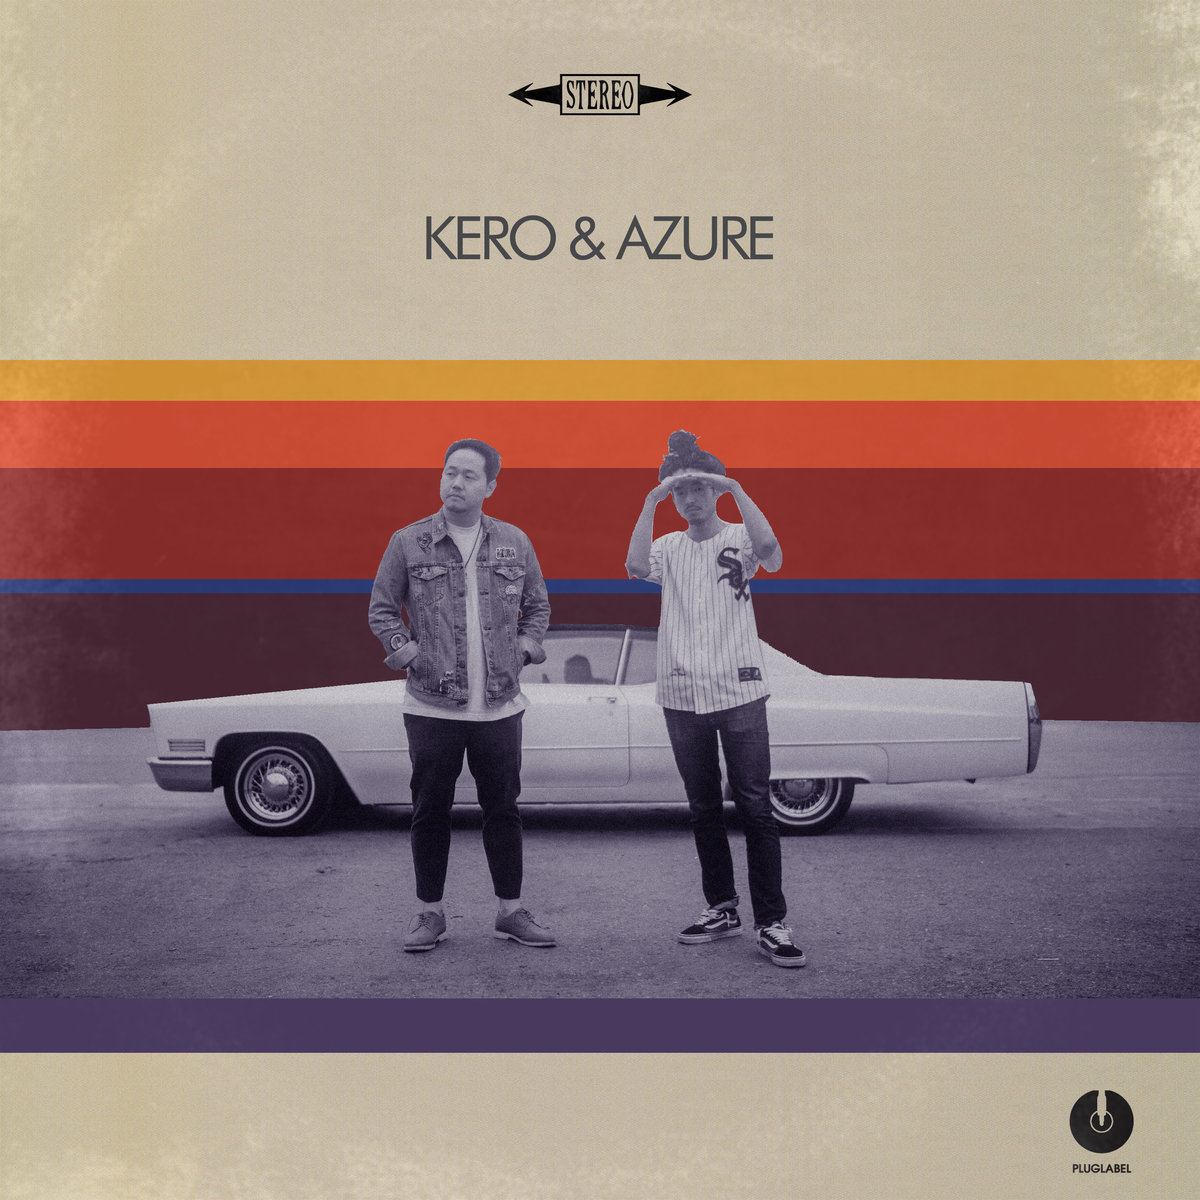 Let the Good Times Roll with “Kero & Azure” (+ Slipmat Giveaway)